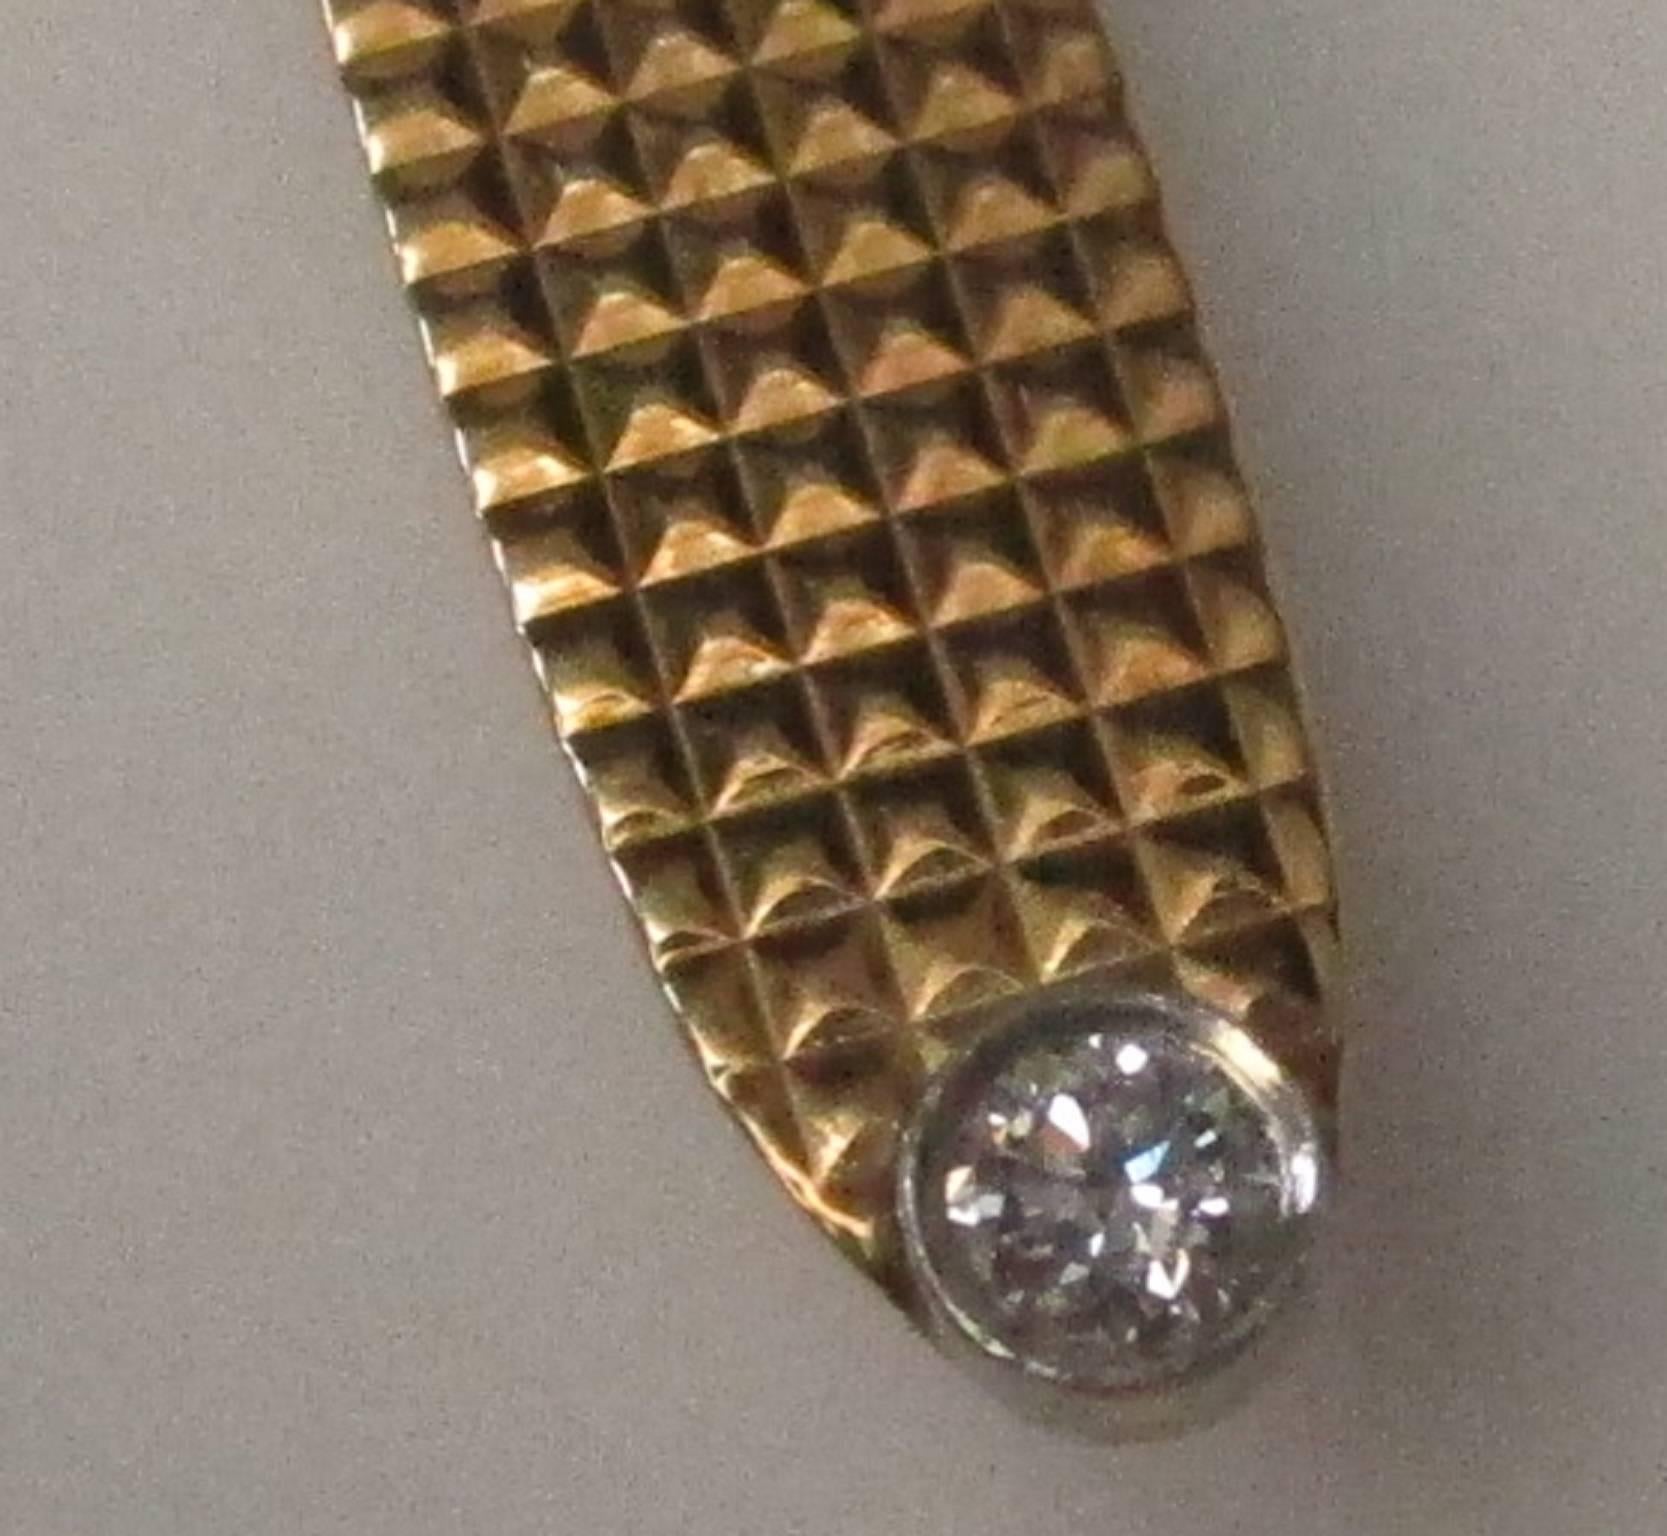 This is a Tiffany and Co. tie clip made of patterned 14K yellow gold with a brilliant 0.10ct diamond, H color and VS1 clarity, in a platinum bezel. No self respecting man wants his tie flapping around, might as well look good with this exquisite tie